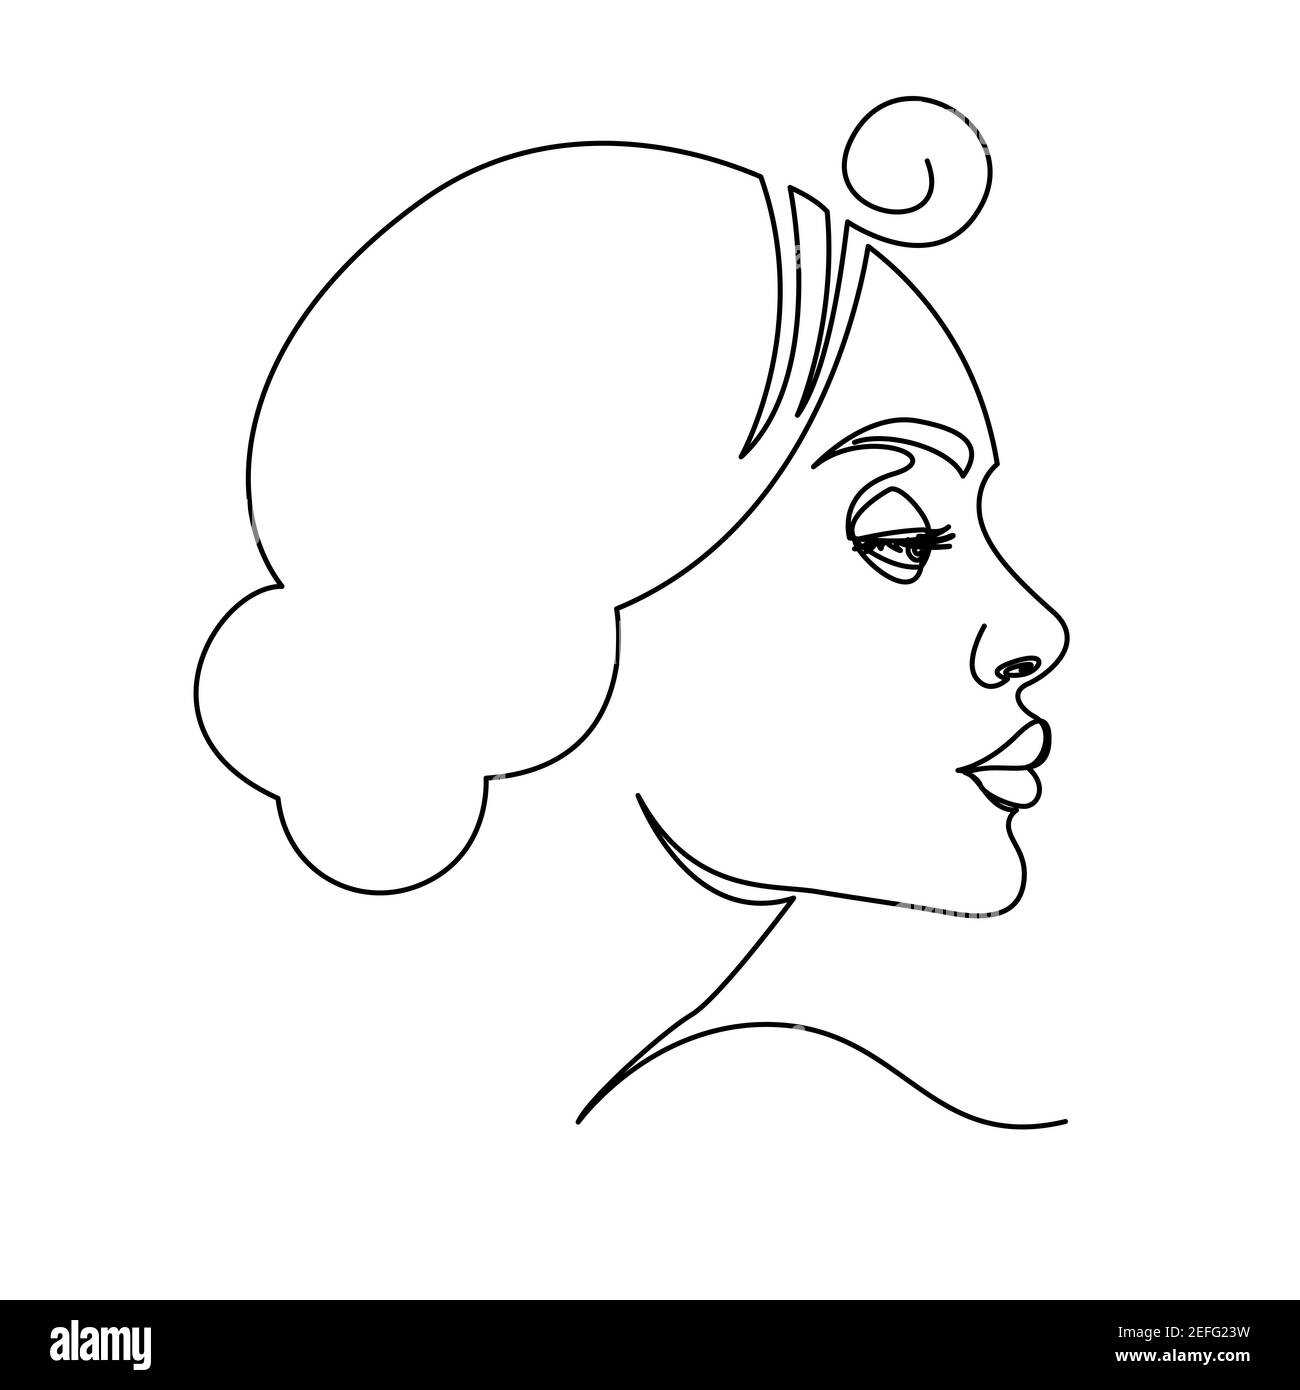 Woman face continuous line drawing. Abstract minimal woman portrait. Line art, drawing of face , fashion concept, woman beauty minimalist, vector. Stock Photo